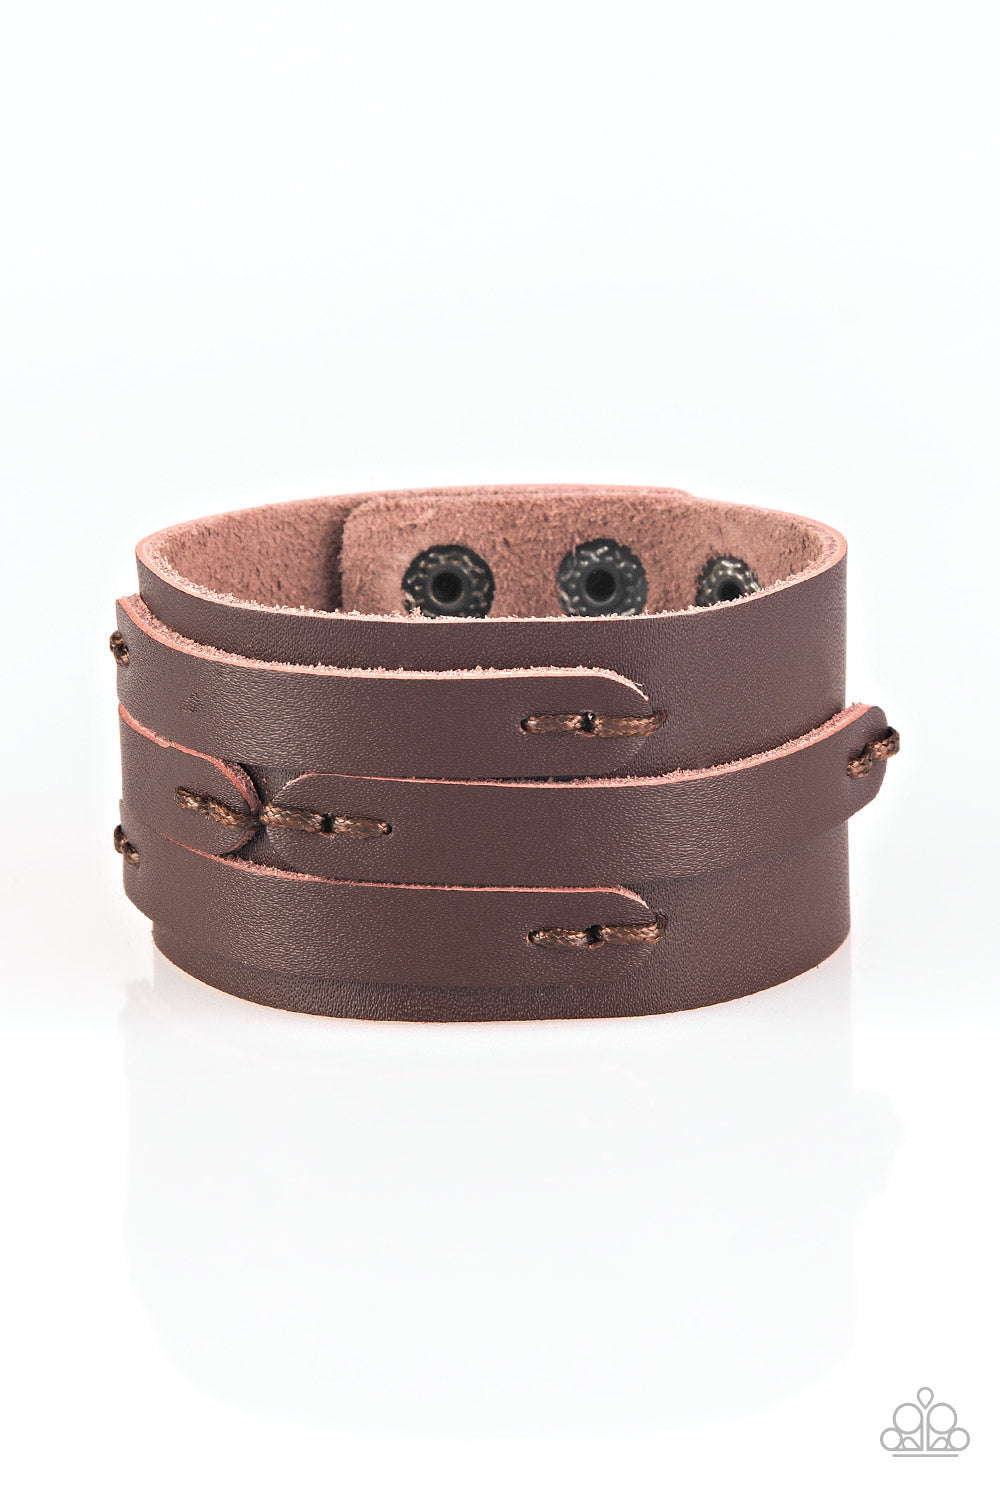 In or OUTLAW - Brown Leather Urban Bracelet - Paparazzi Accessories - Pieces of brown leather are stitched in place across the front of a thick brown leather band for a rugged look. Features an adjustable snap closure. Bejeweled Accessories By Kristie - Trendy fashion jewelry for everyone -